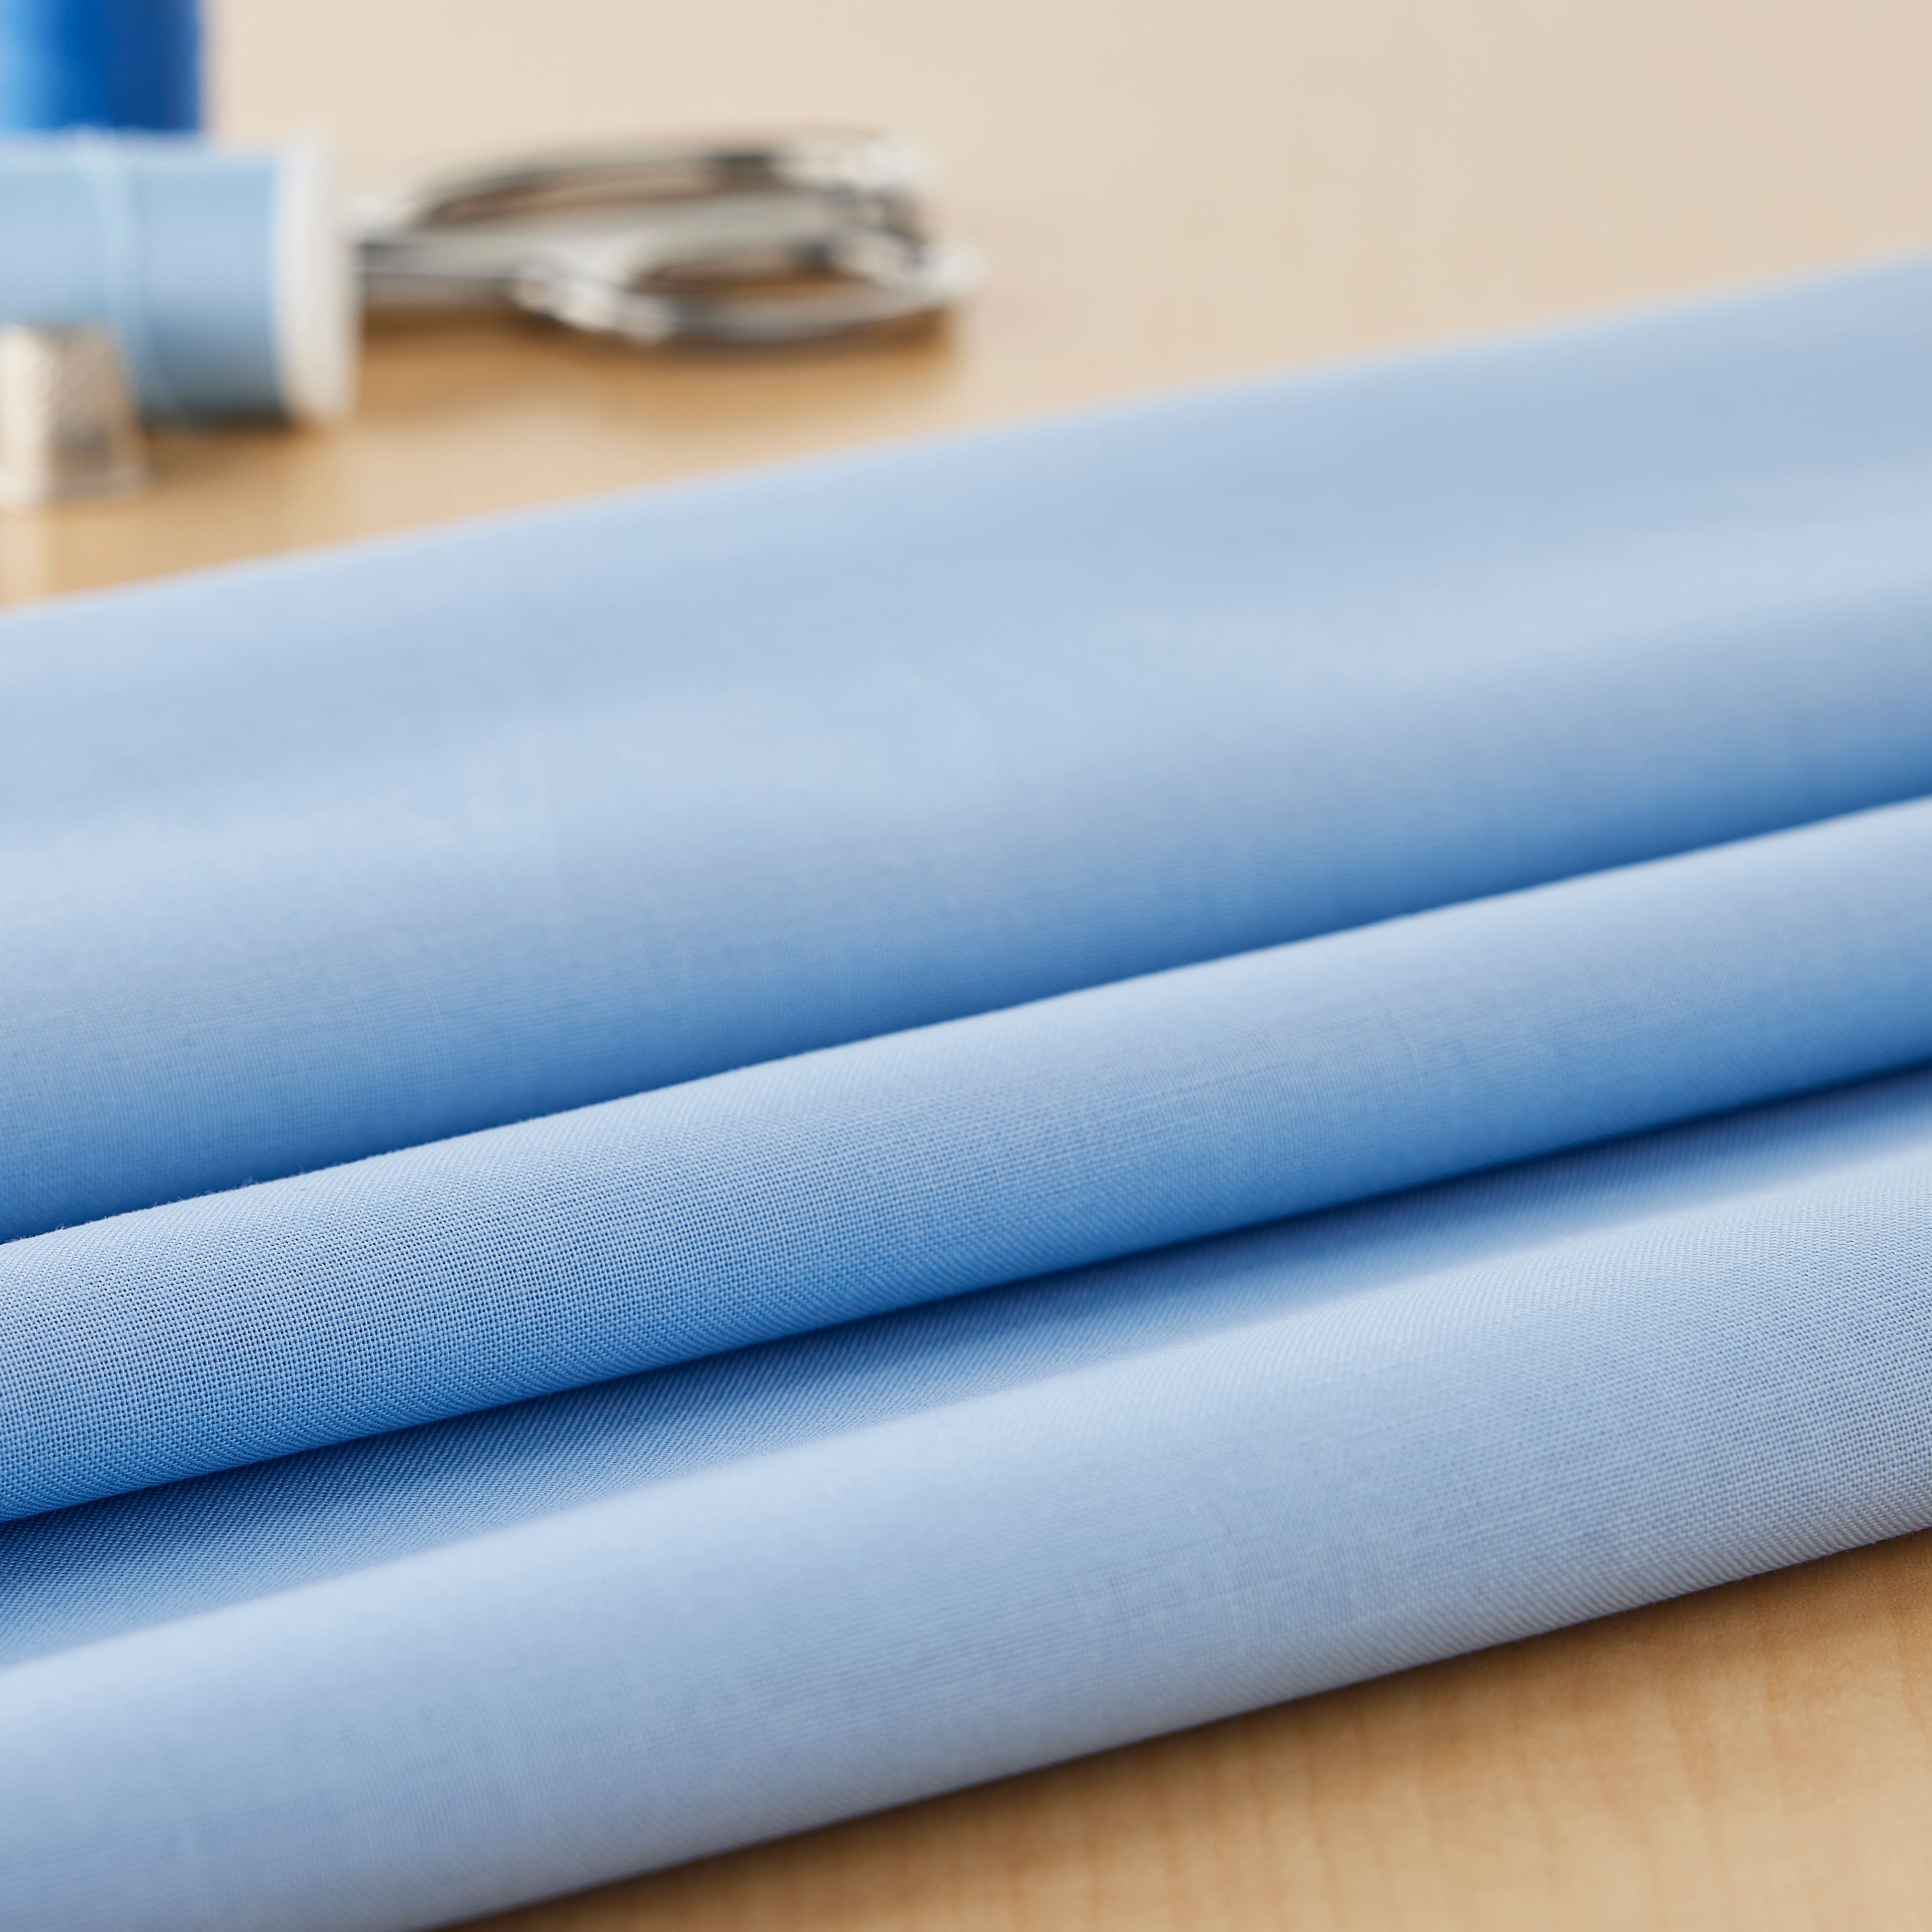 20 yd. Full Bolt: Springs Creative Light Blue Solid Cotton Fabric